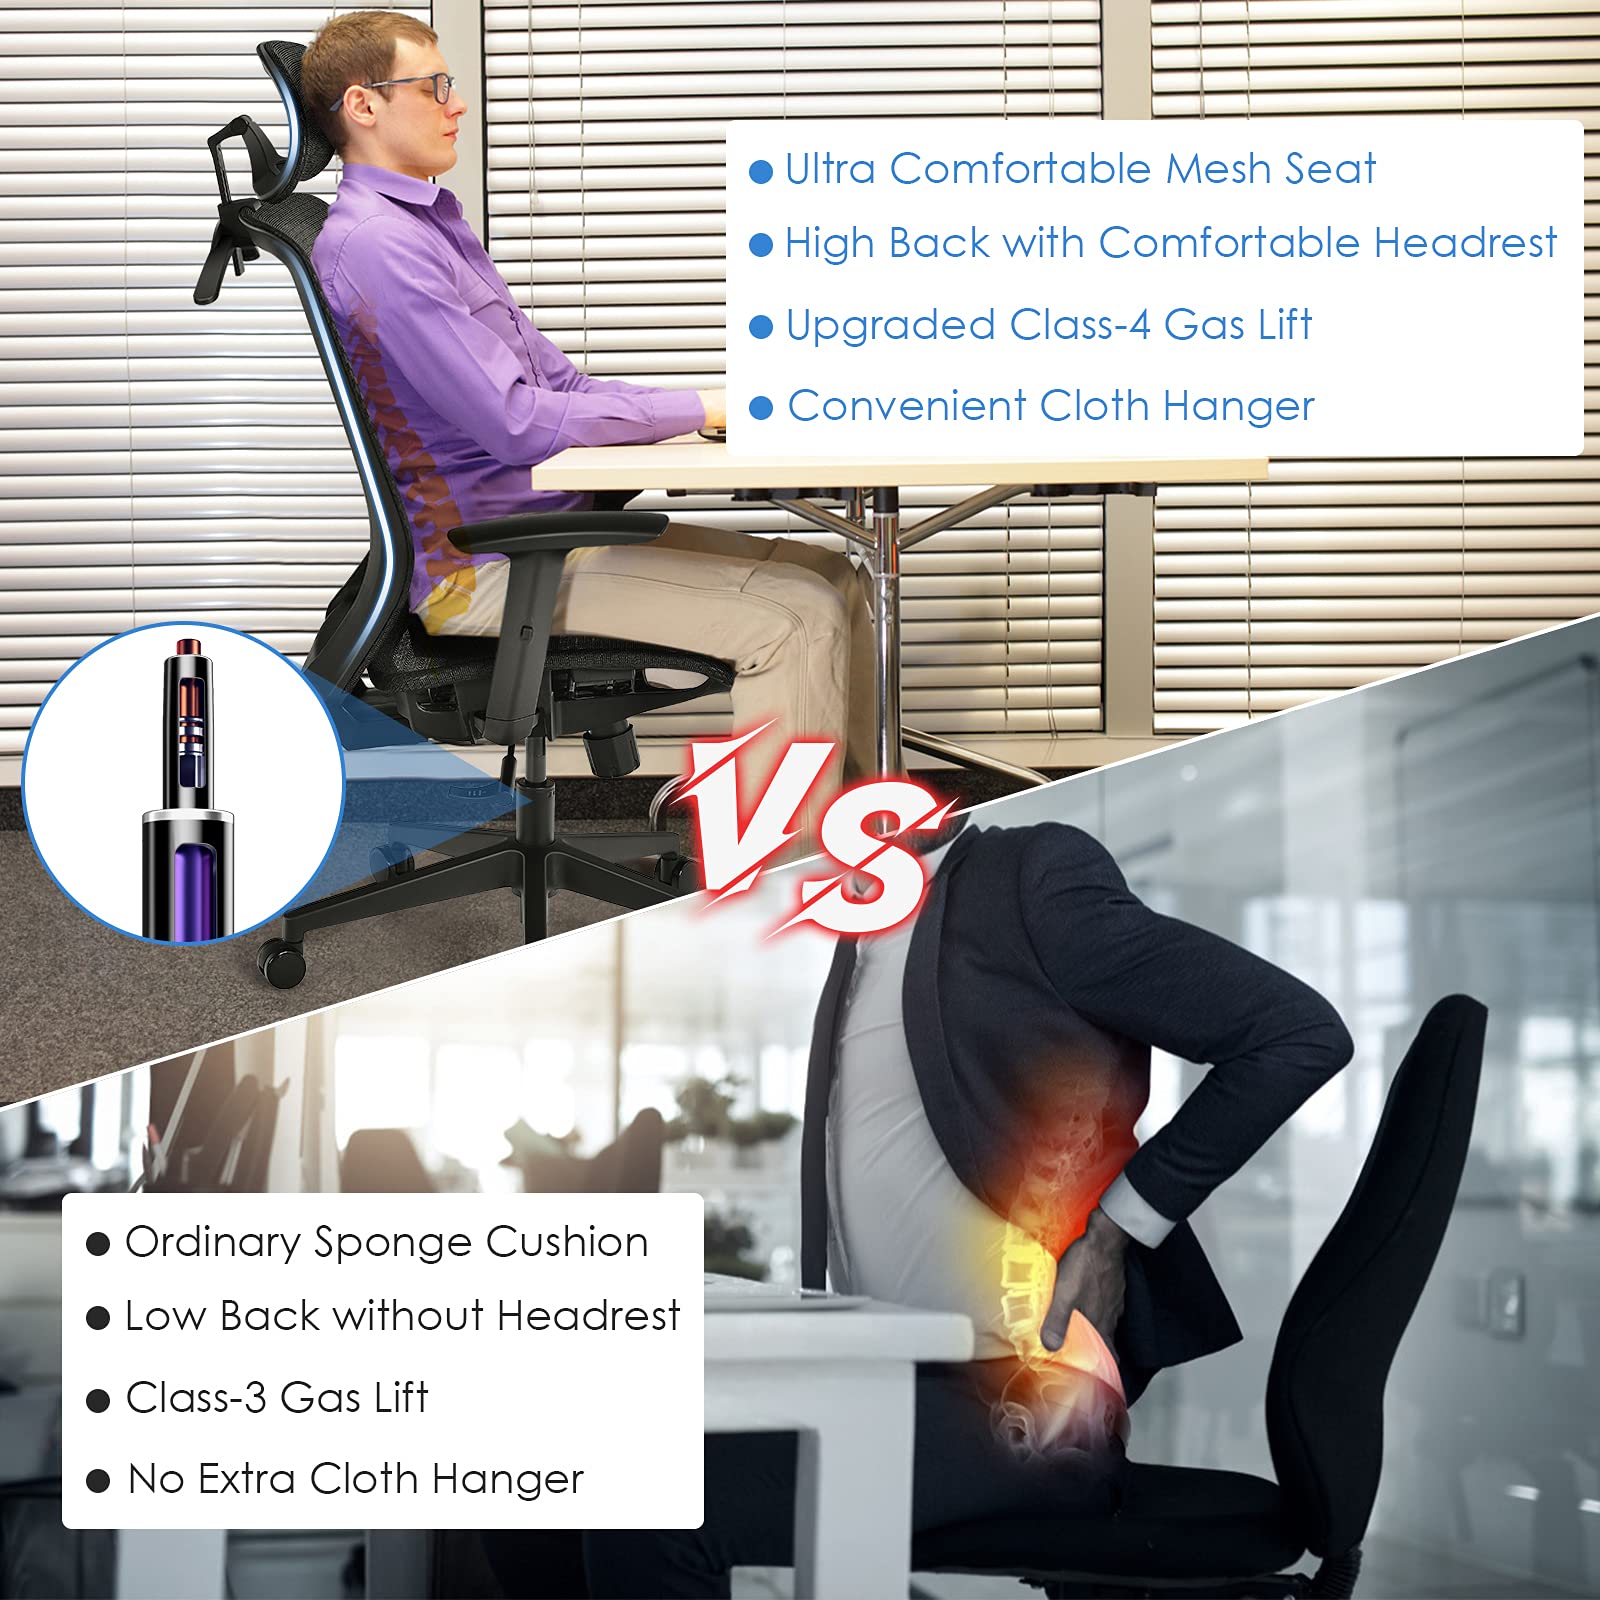 POWERSTONE Ergonomic Office Chair - High-Back Computer Desk Mesh Chair with Clothing Hanger - Executive Swivel Task Chair with Adjustable Arms and Head Rest (Gray)